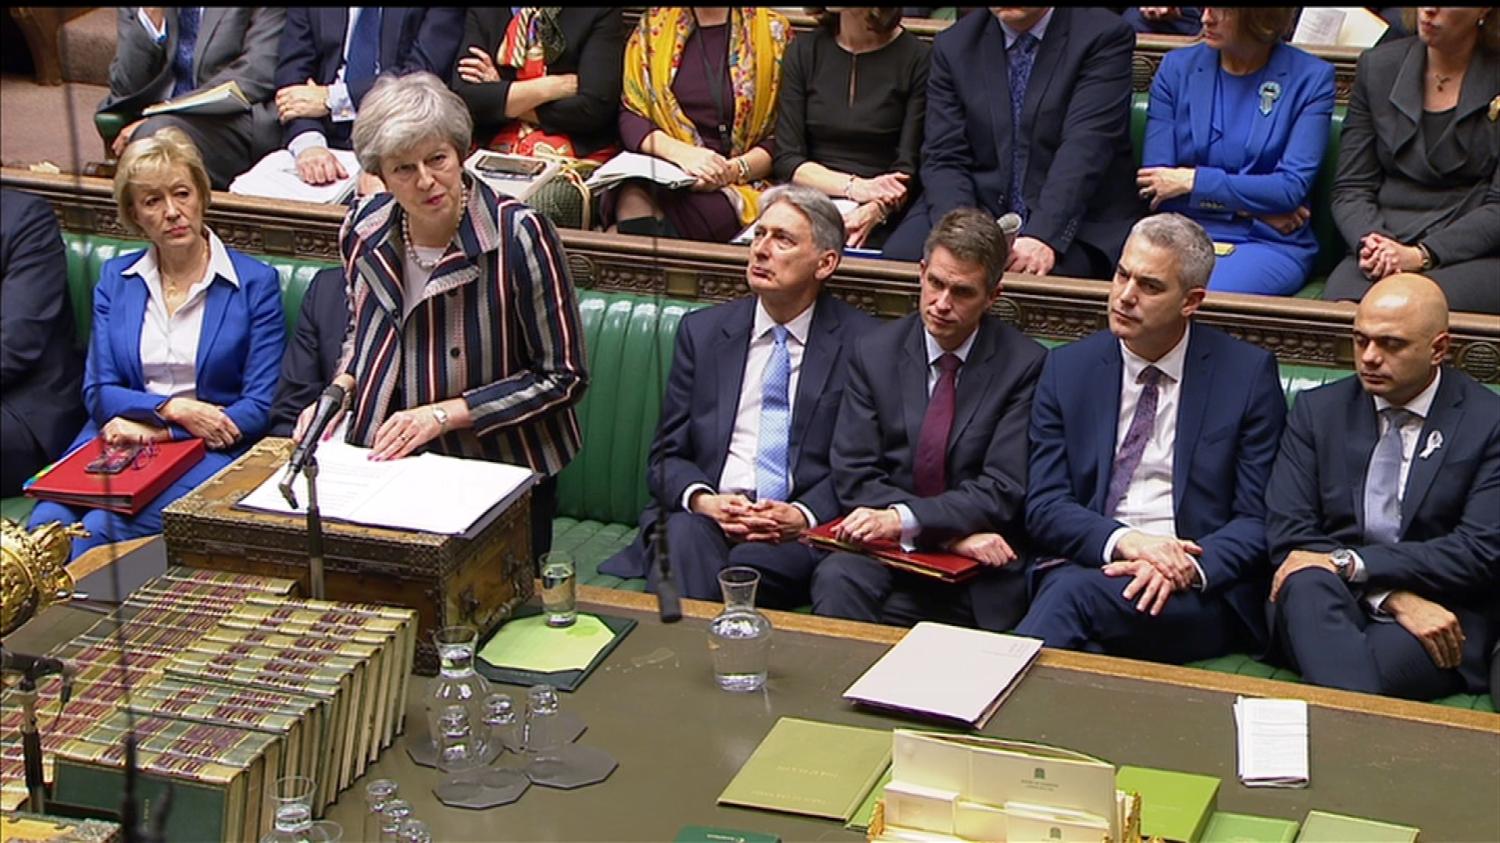 Britain's Prime Minister Theresa May makes a statement in the House of Commons, London, Britain November 26, 2018. Parliament TV handout via REUTERS FOR EDITORIAL USE ONLY. NOT FOR SALE FOR MARKETING OR ADVERTISING CAMPAIGNS - RC1631E6F580